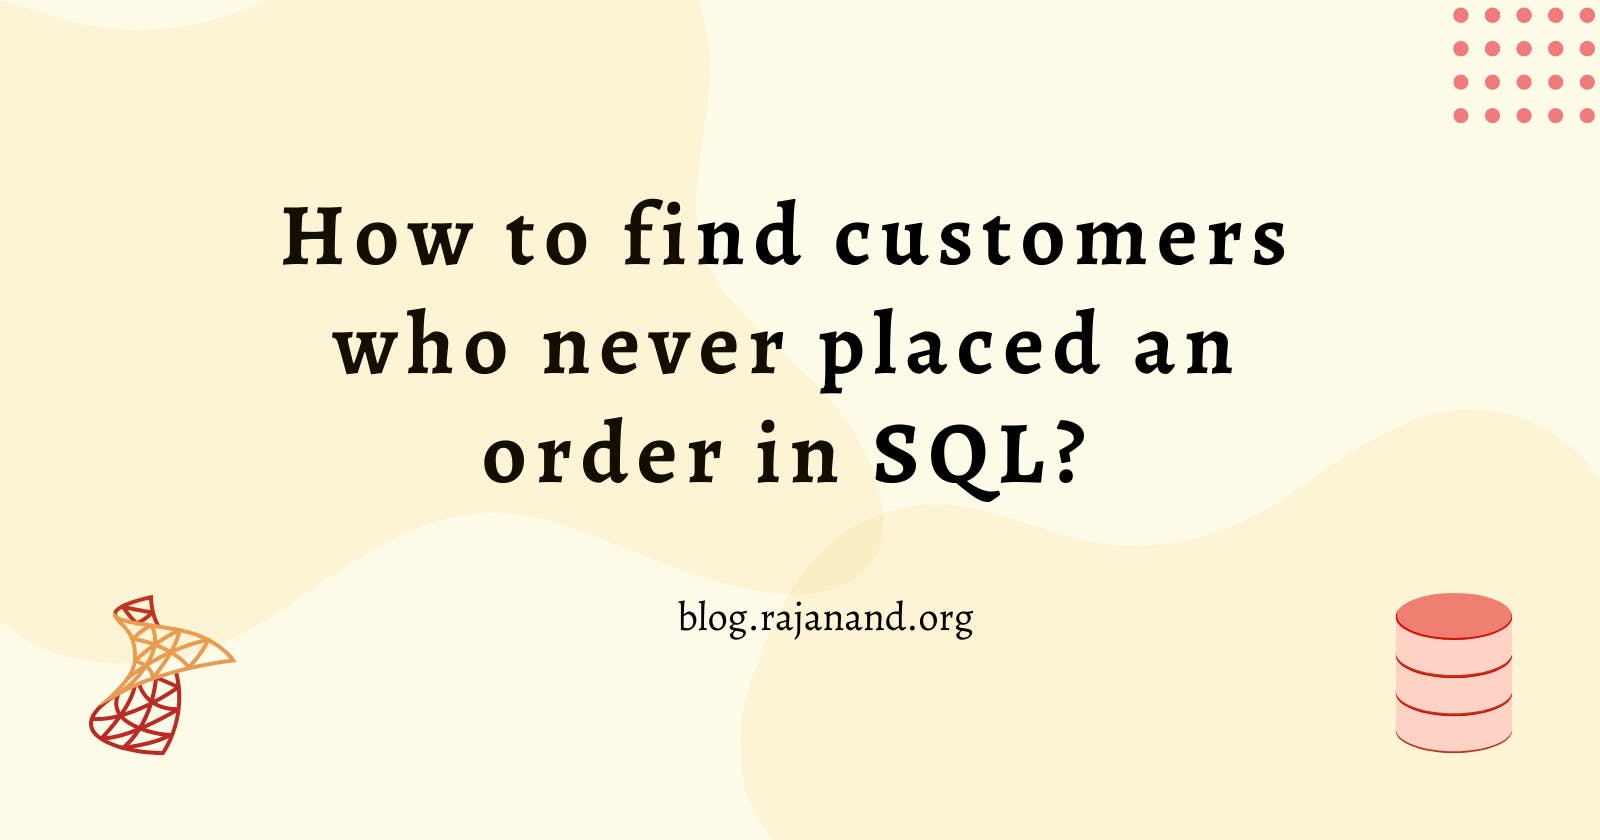 How to find customers who never placed an order in SQL?